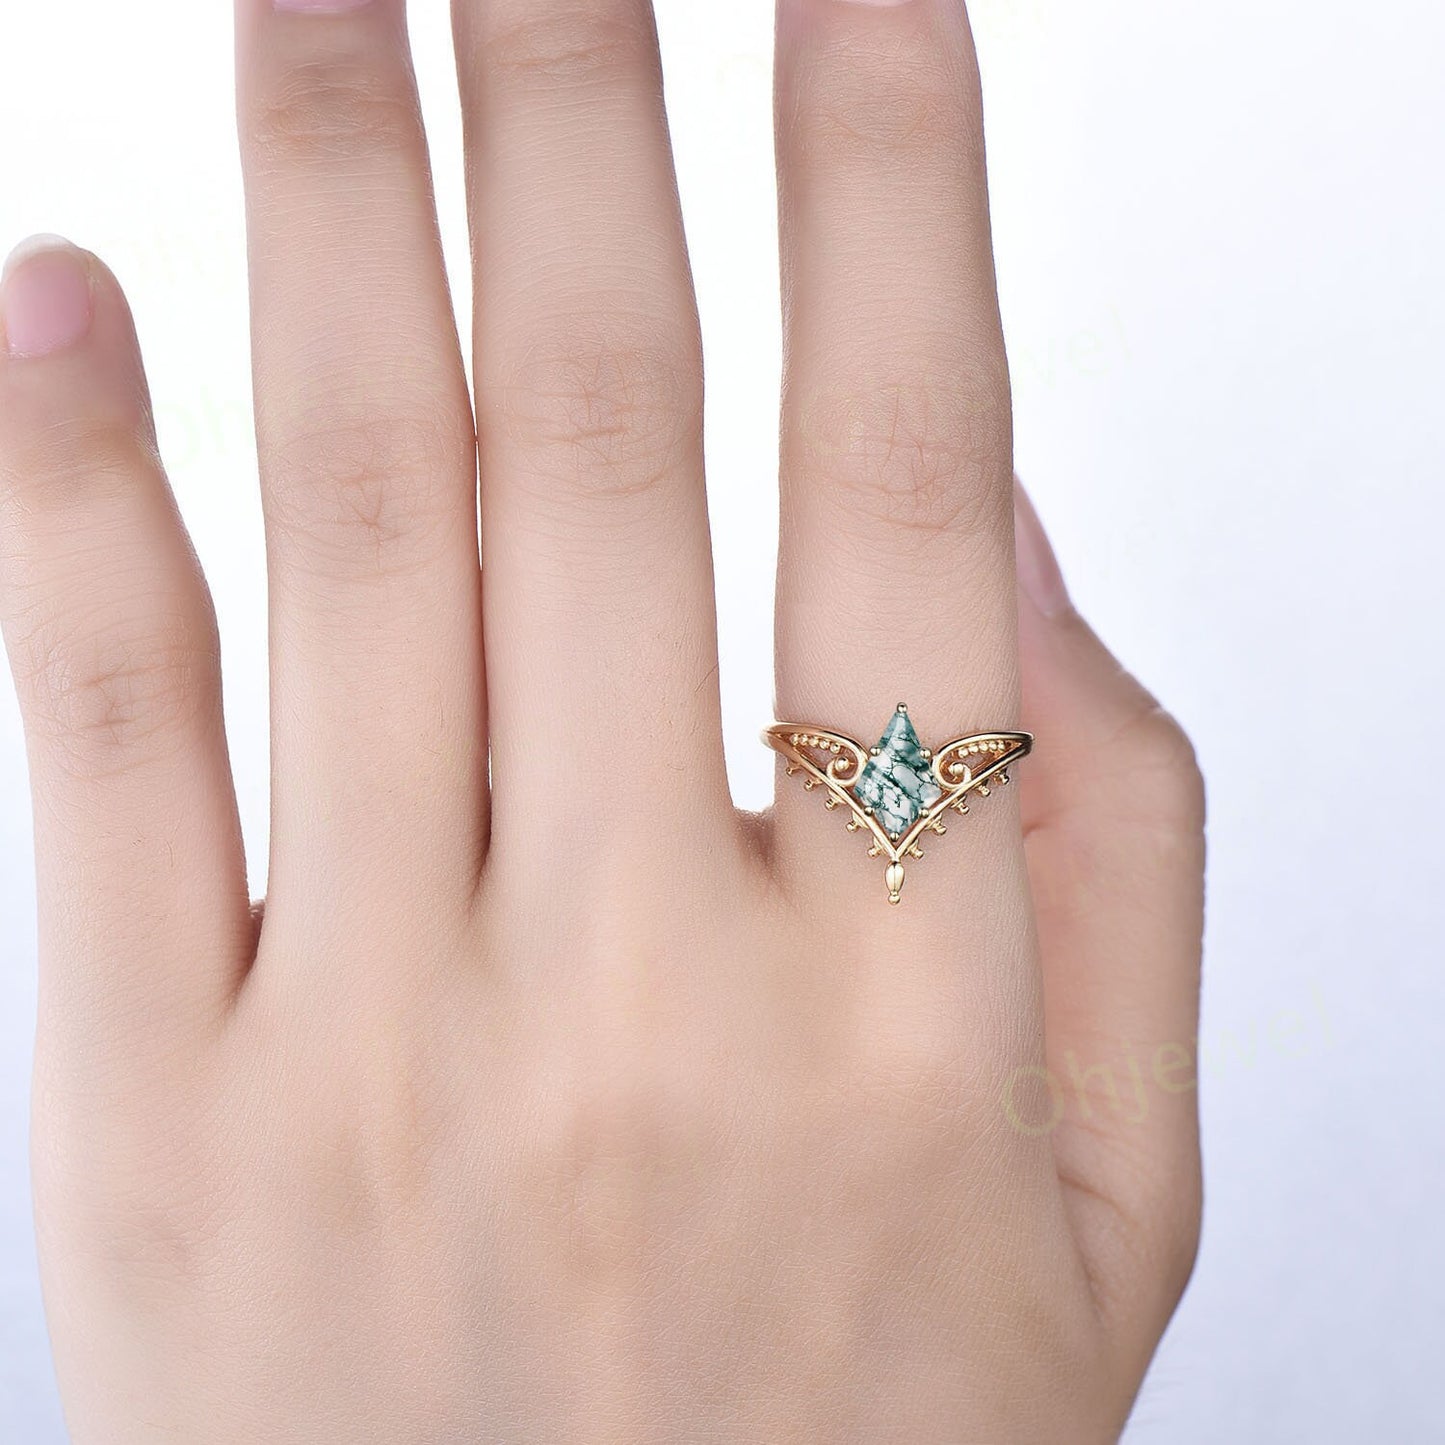 Vintage style kite cut green moss agate engagement ring 14k rose gold unique split shank Solitaire engagement ring women promise ring her